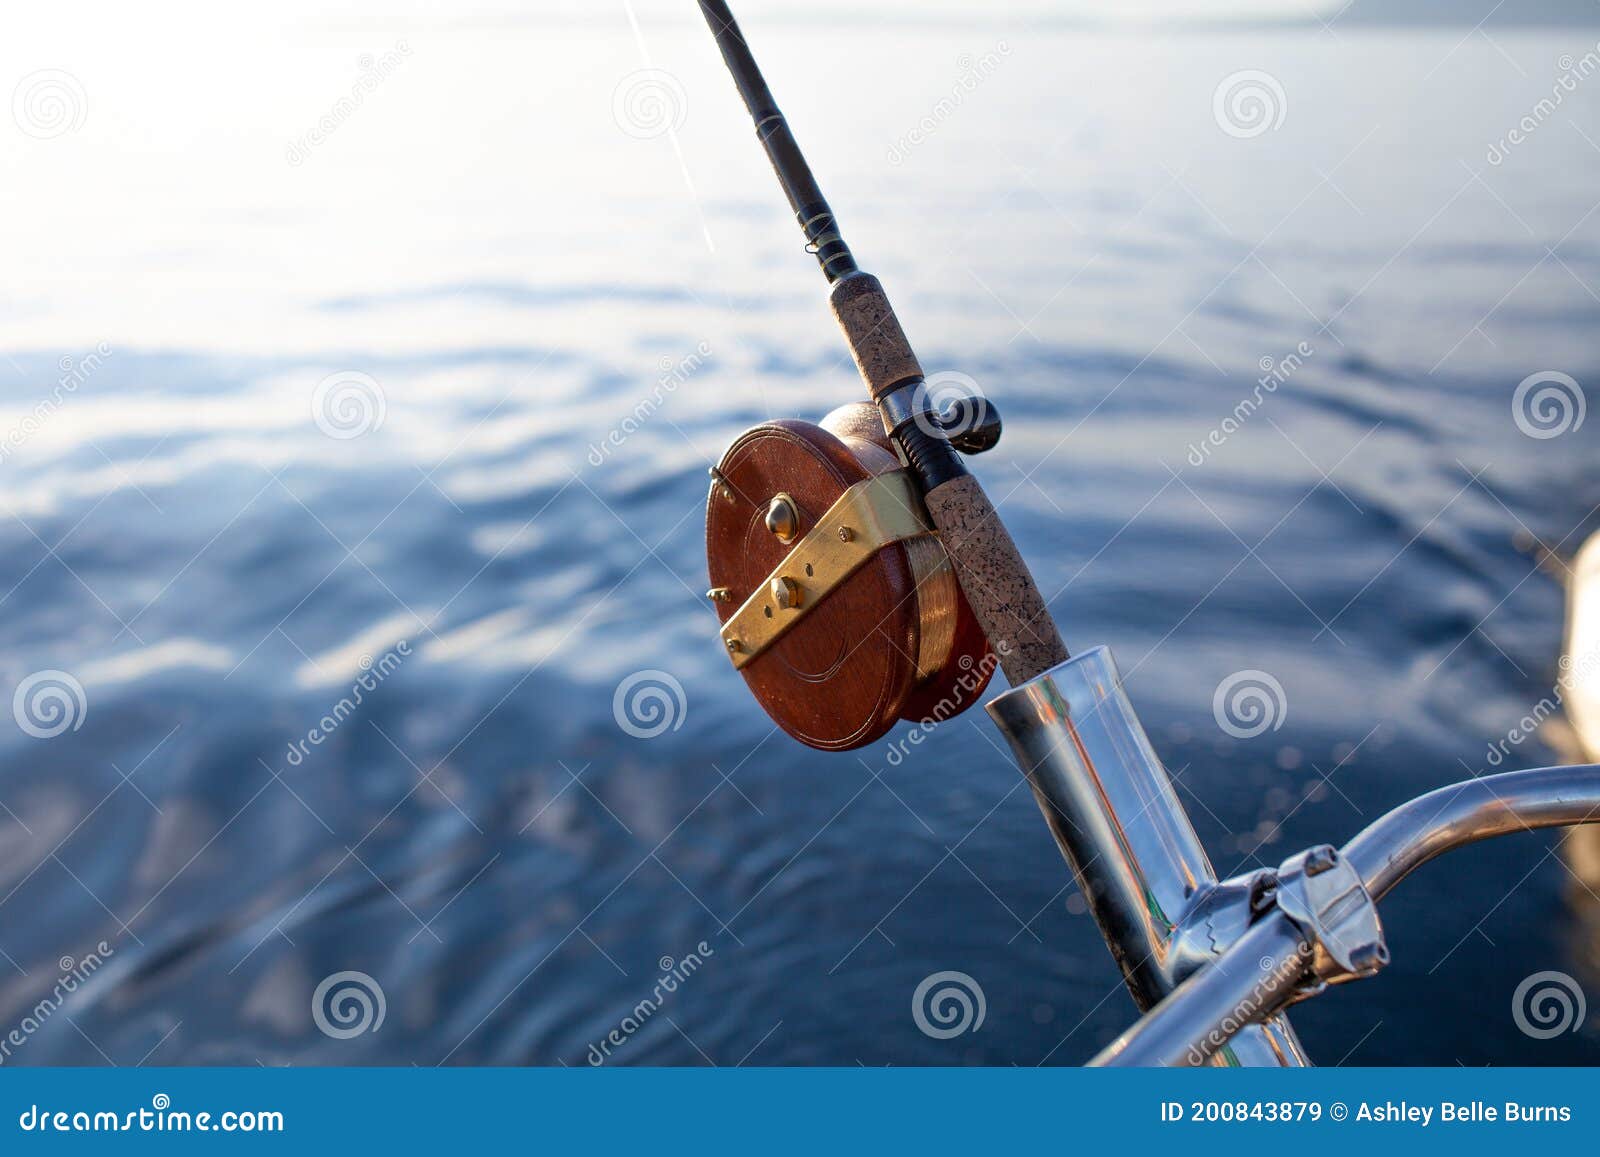 A Close Up of a Wooden Mooching Reel on a Fishing Rod Stock Image